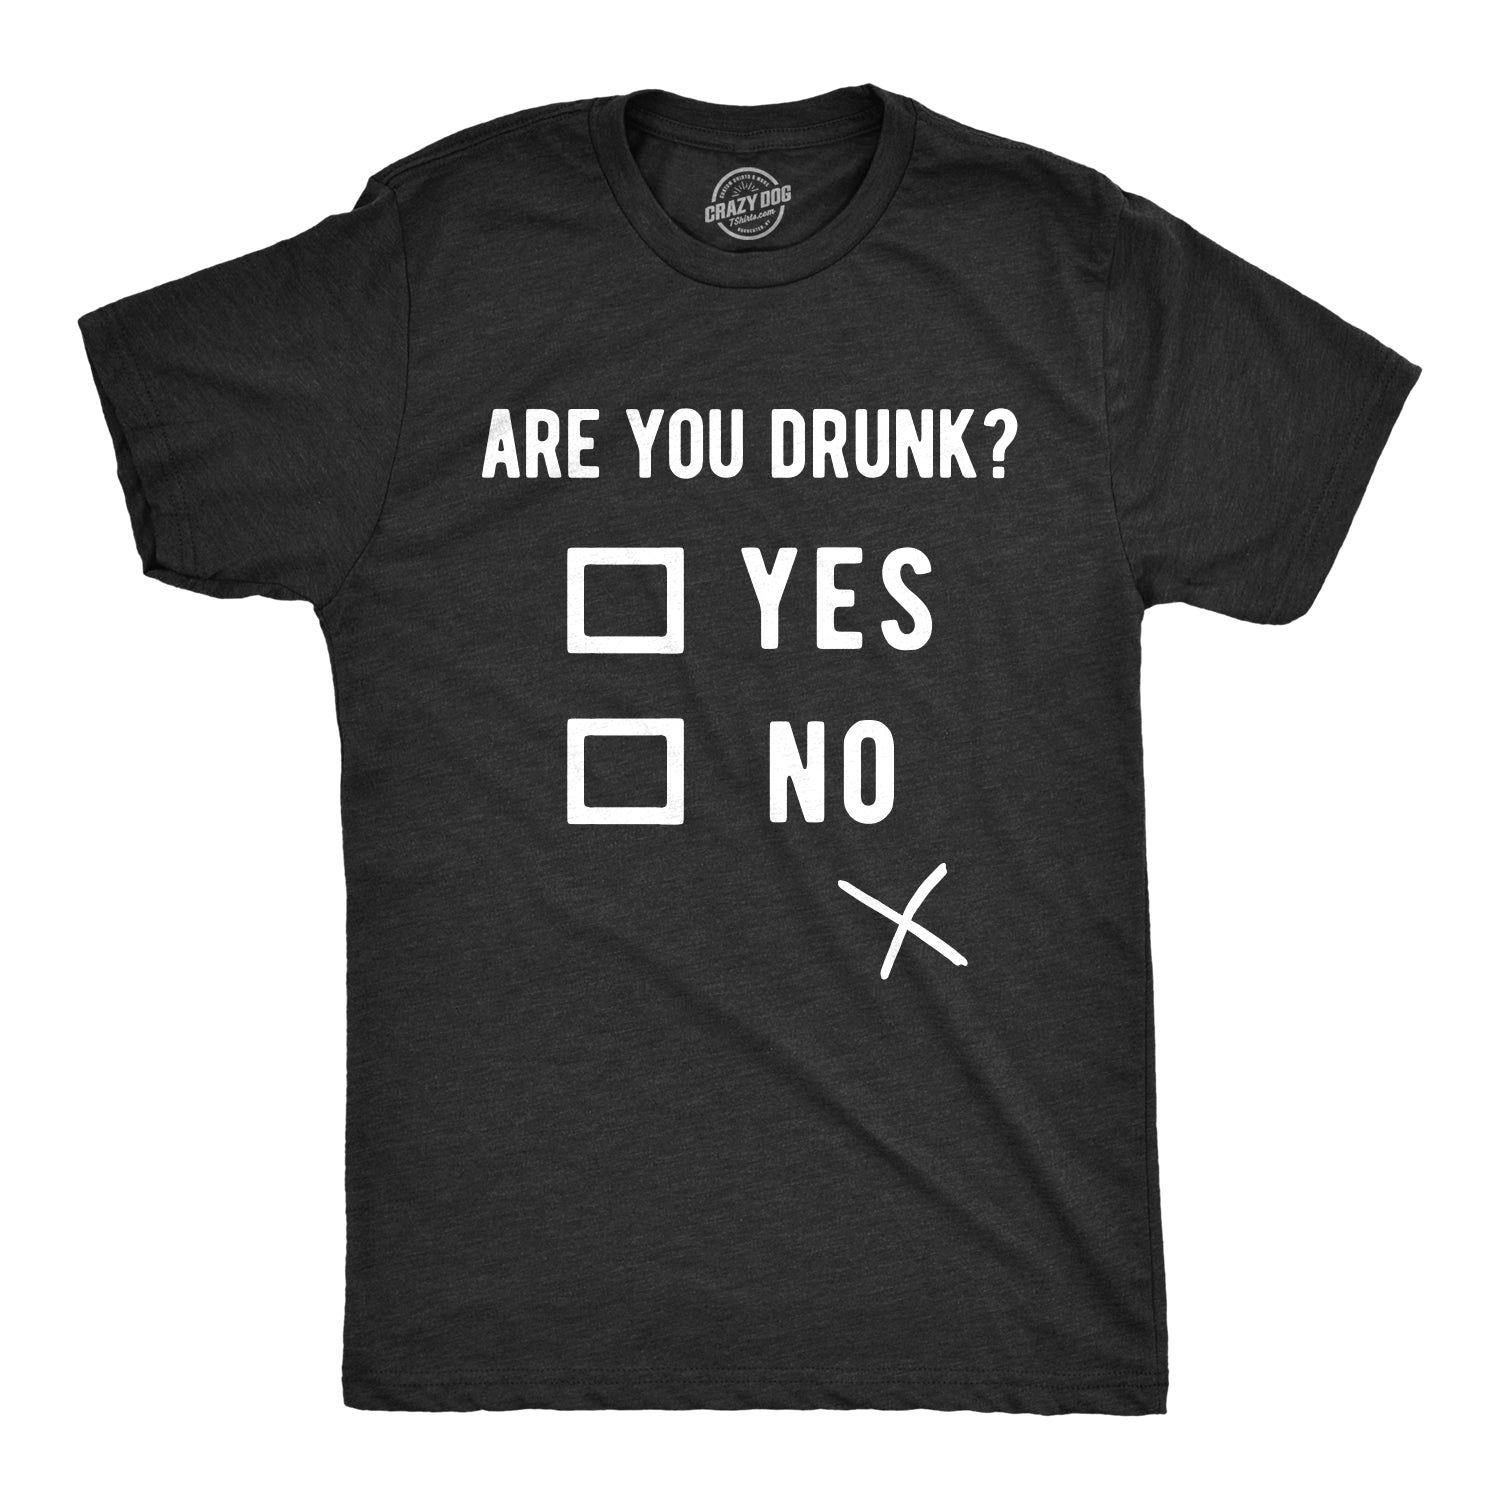 Funny Heather Black Are You Drunk? Mens T Shirt Nerdy Saint Patrick's Day Drinking Tee